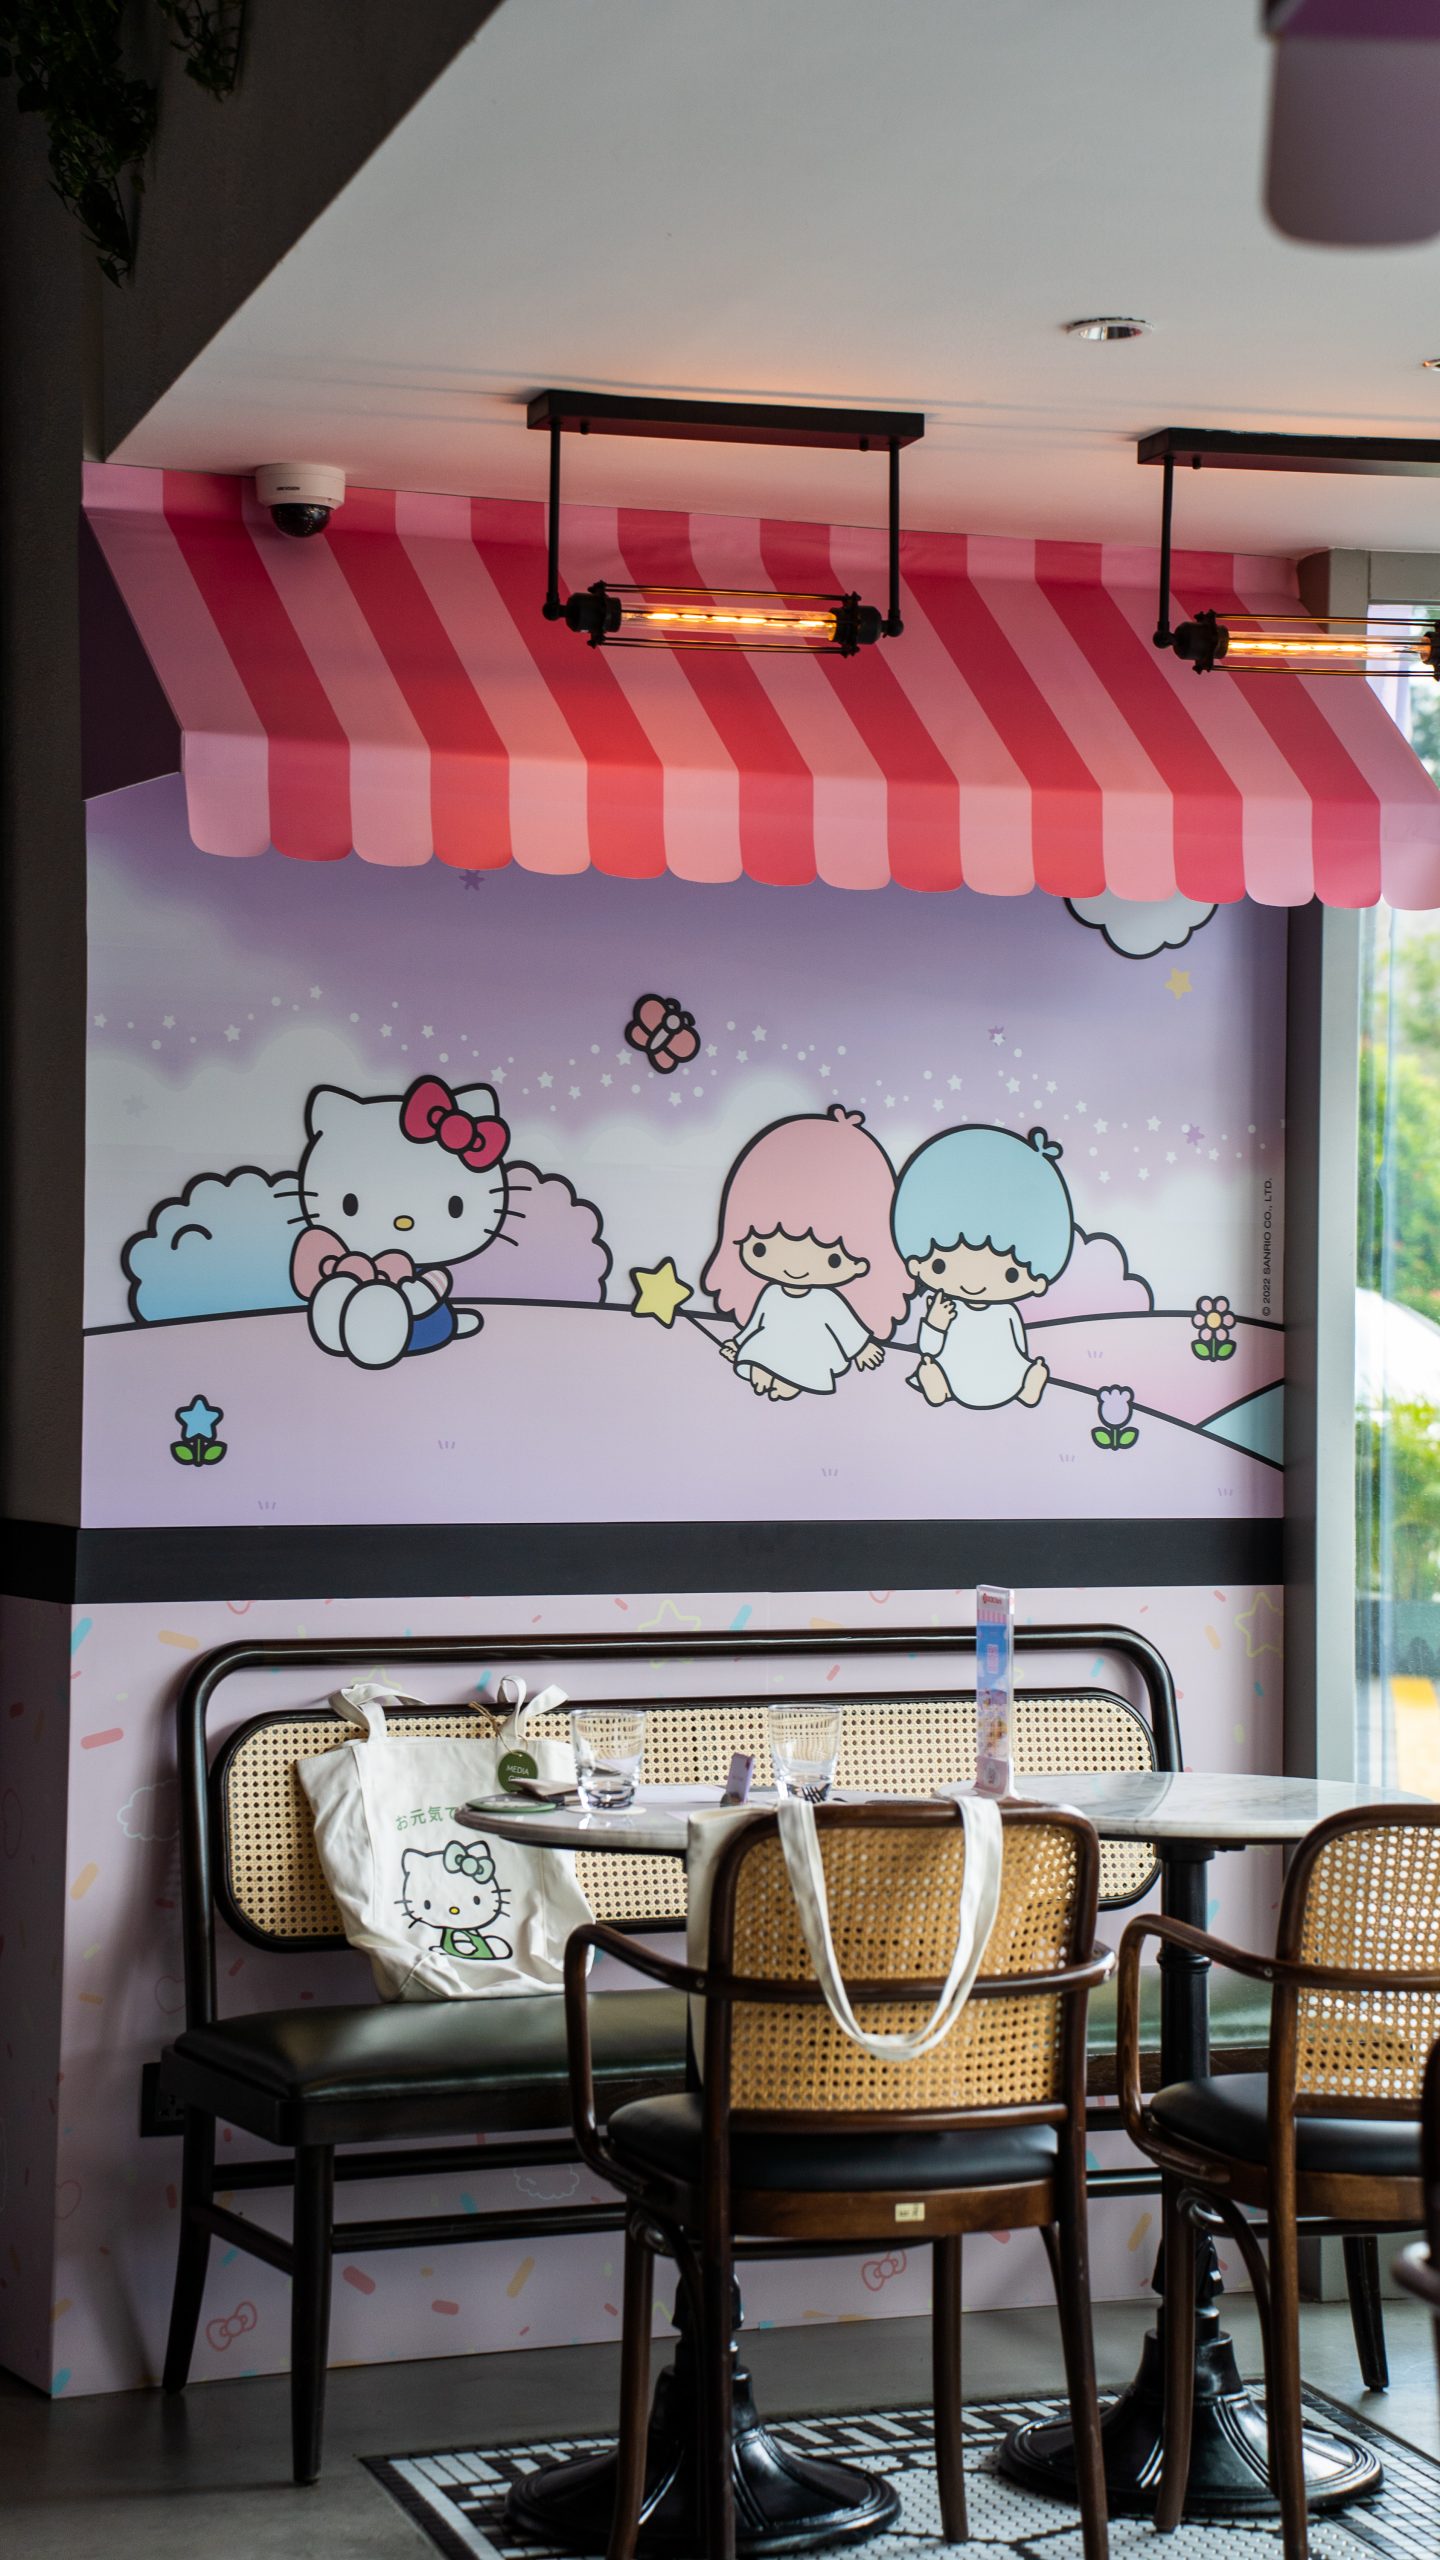 Hello Kitty Cafe Las Vegas on Instagram: “🎀 POP-UP TIME 🎀 . We